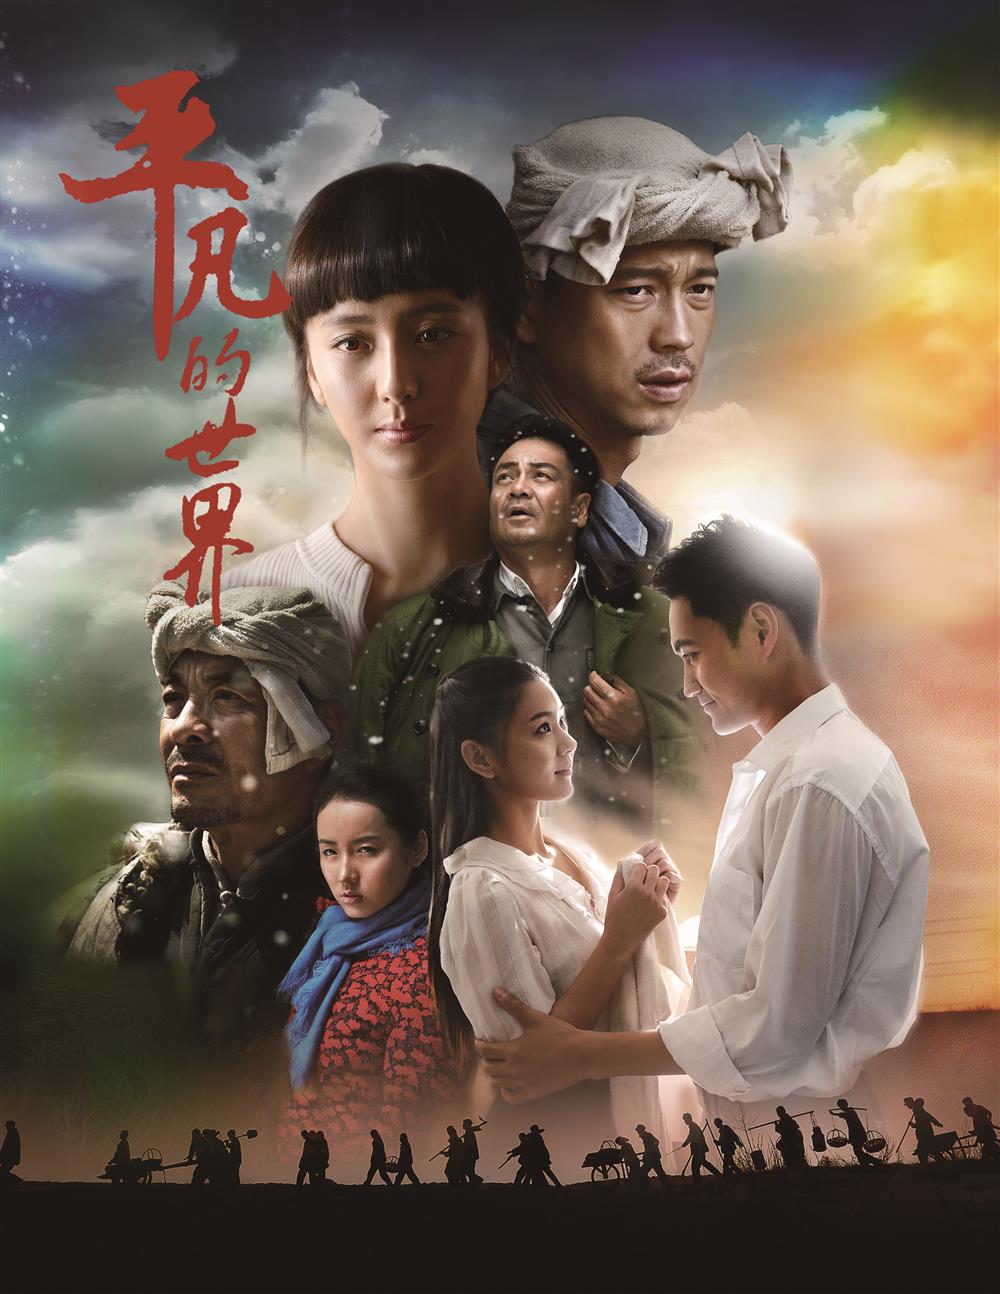 With a stronger sense of patriotism, excellent Shanghai produced TV dramas in the new era have opened up a creative landscape: With fireworks in the world of Shanghai | TV dramas | Fireworks